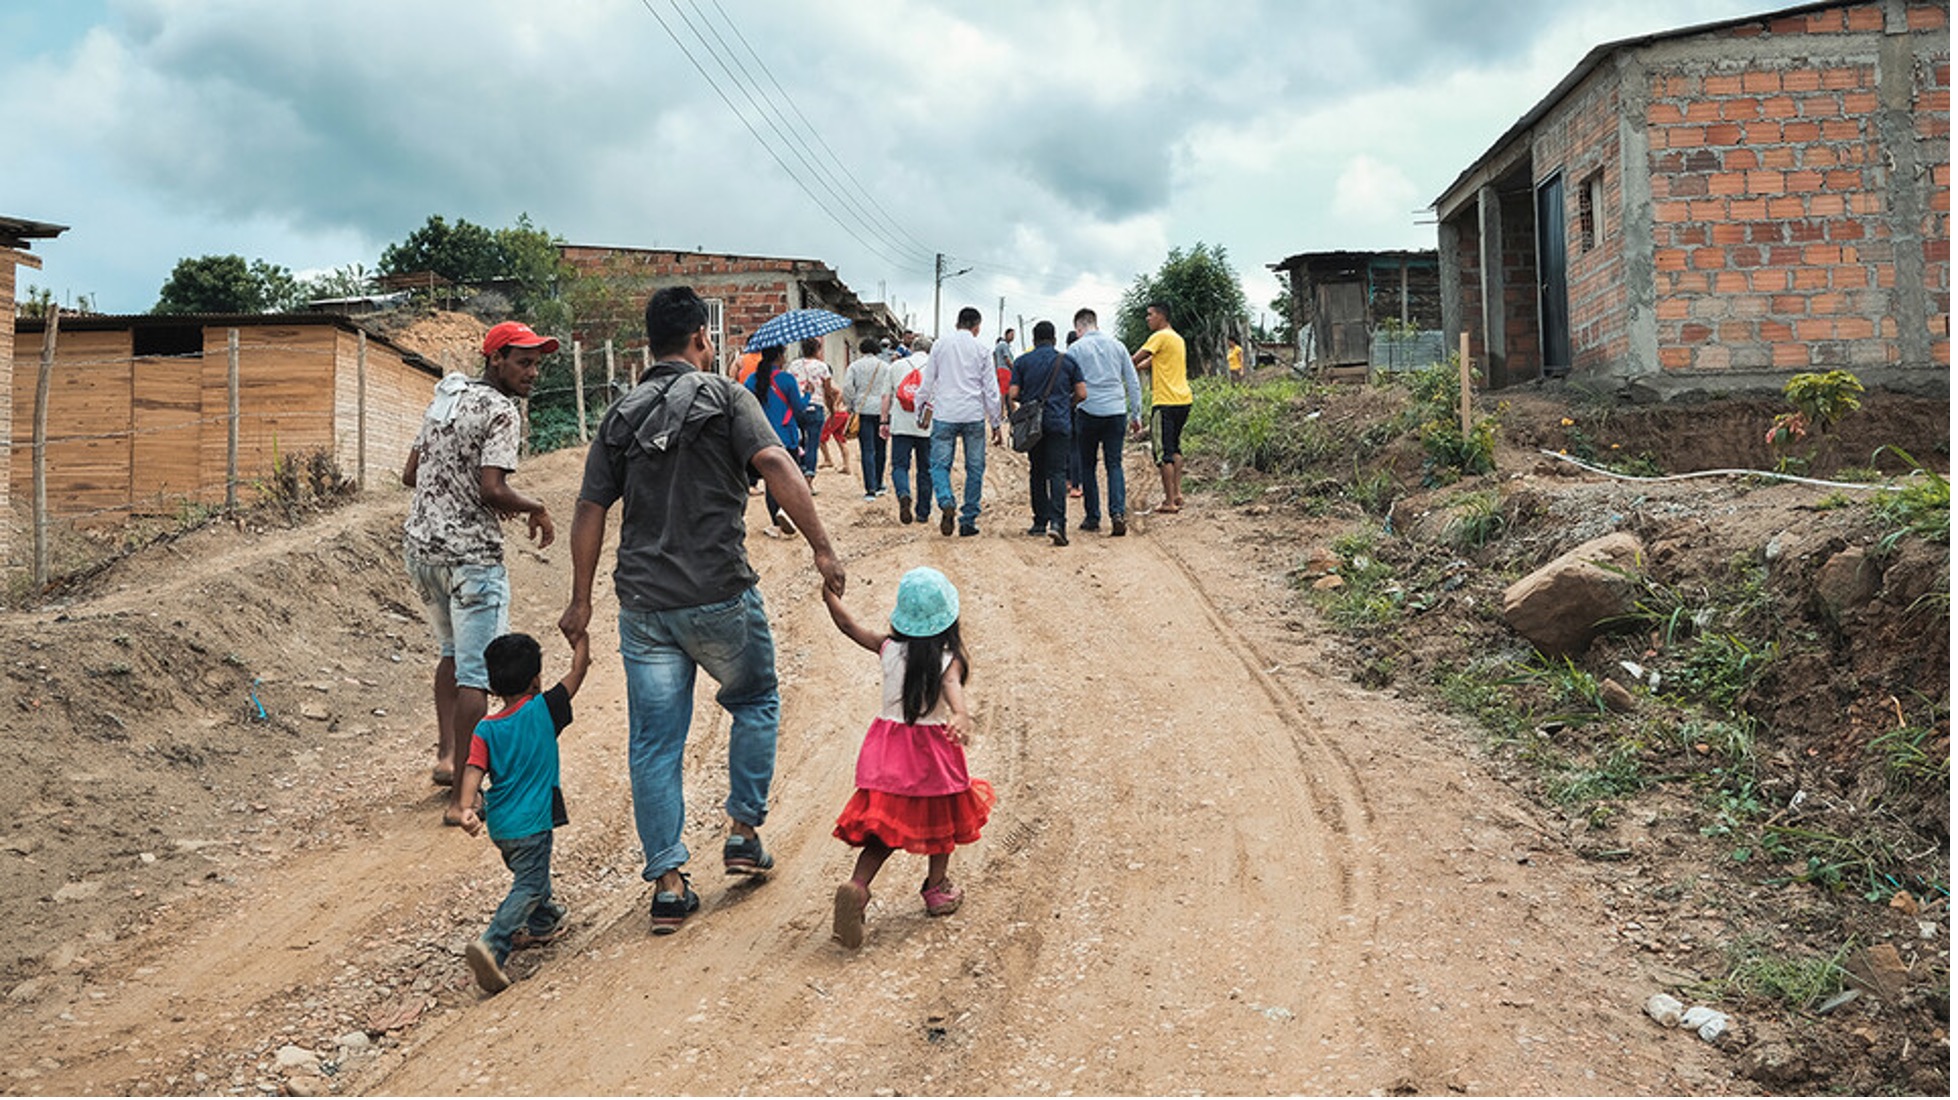 People walk with children in a third-world country village.